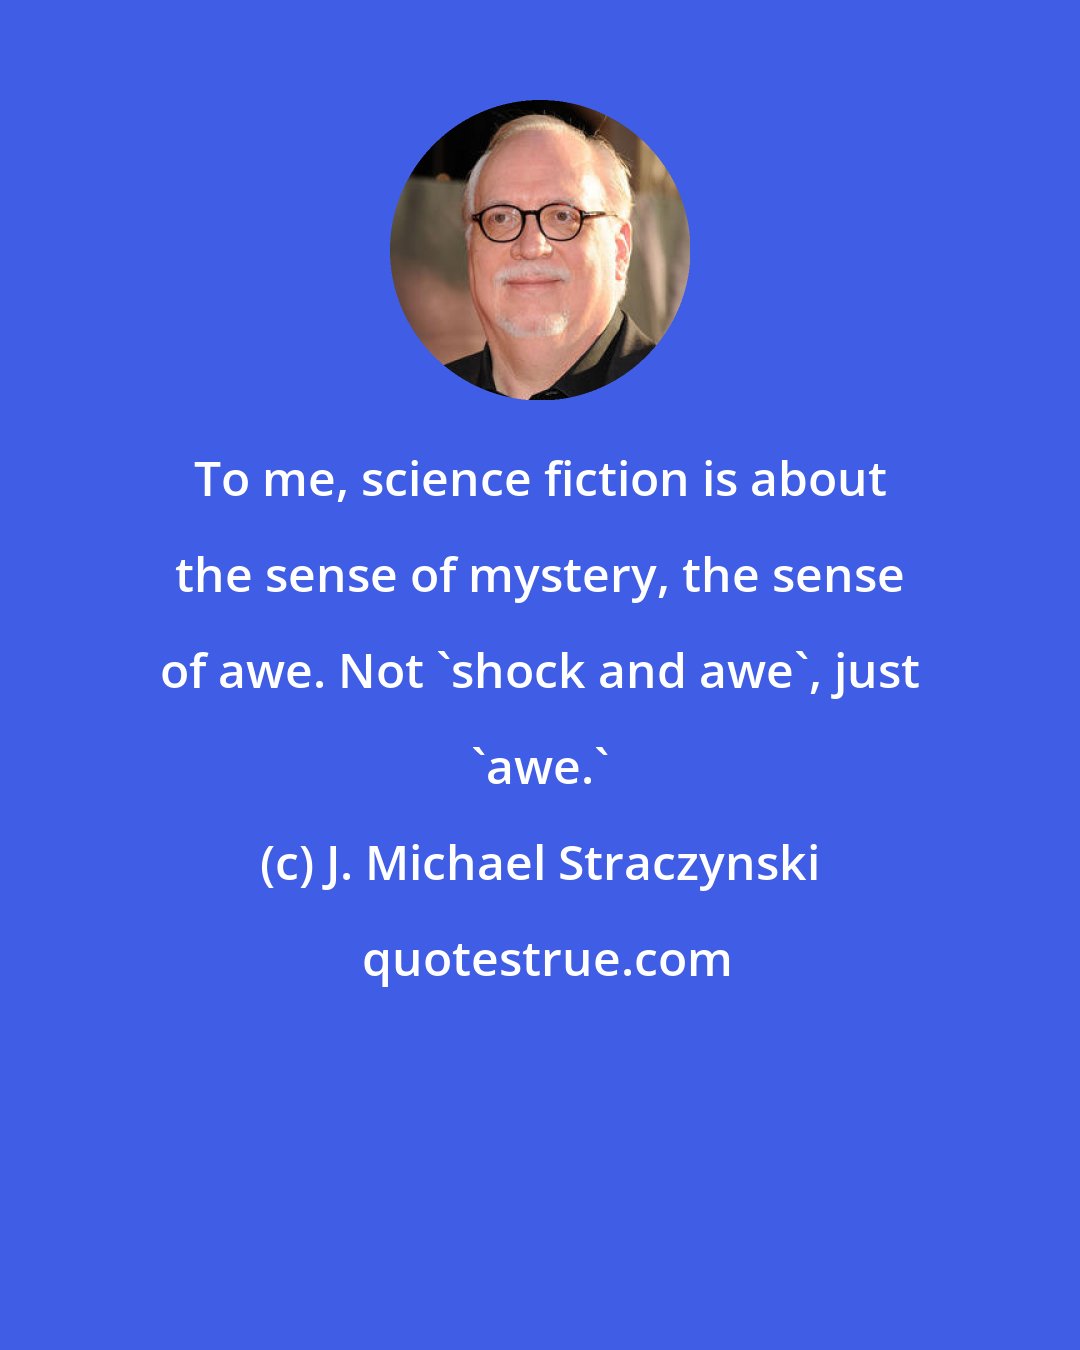 J. Michael Straczynski: To me, science fiction is about the sense of mystery, the sense of awe. Not 'shock and awe', just 'awe.'